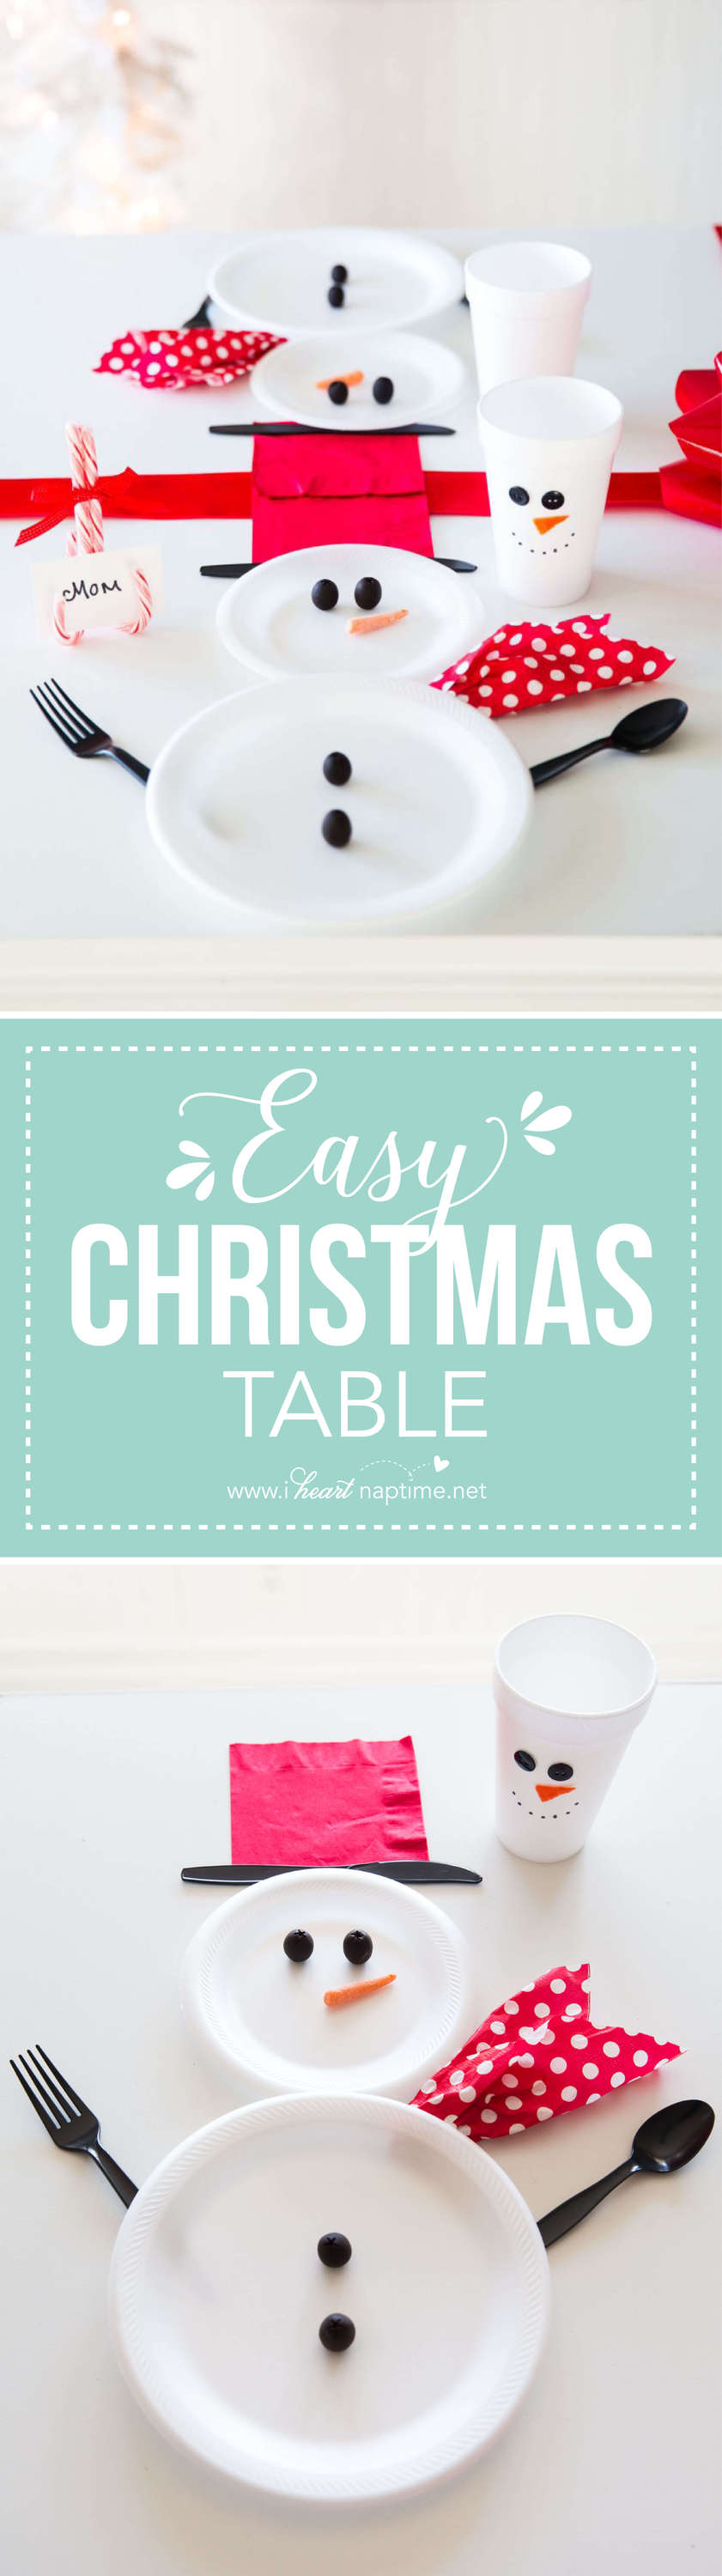 Wrapped Christmas Table and Snowman Plates... an easy and cute way to decorate your table for the holidays!